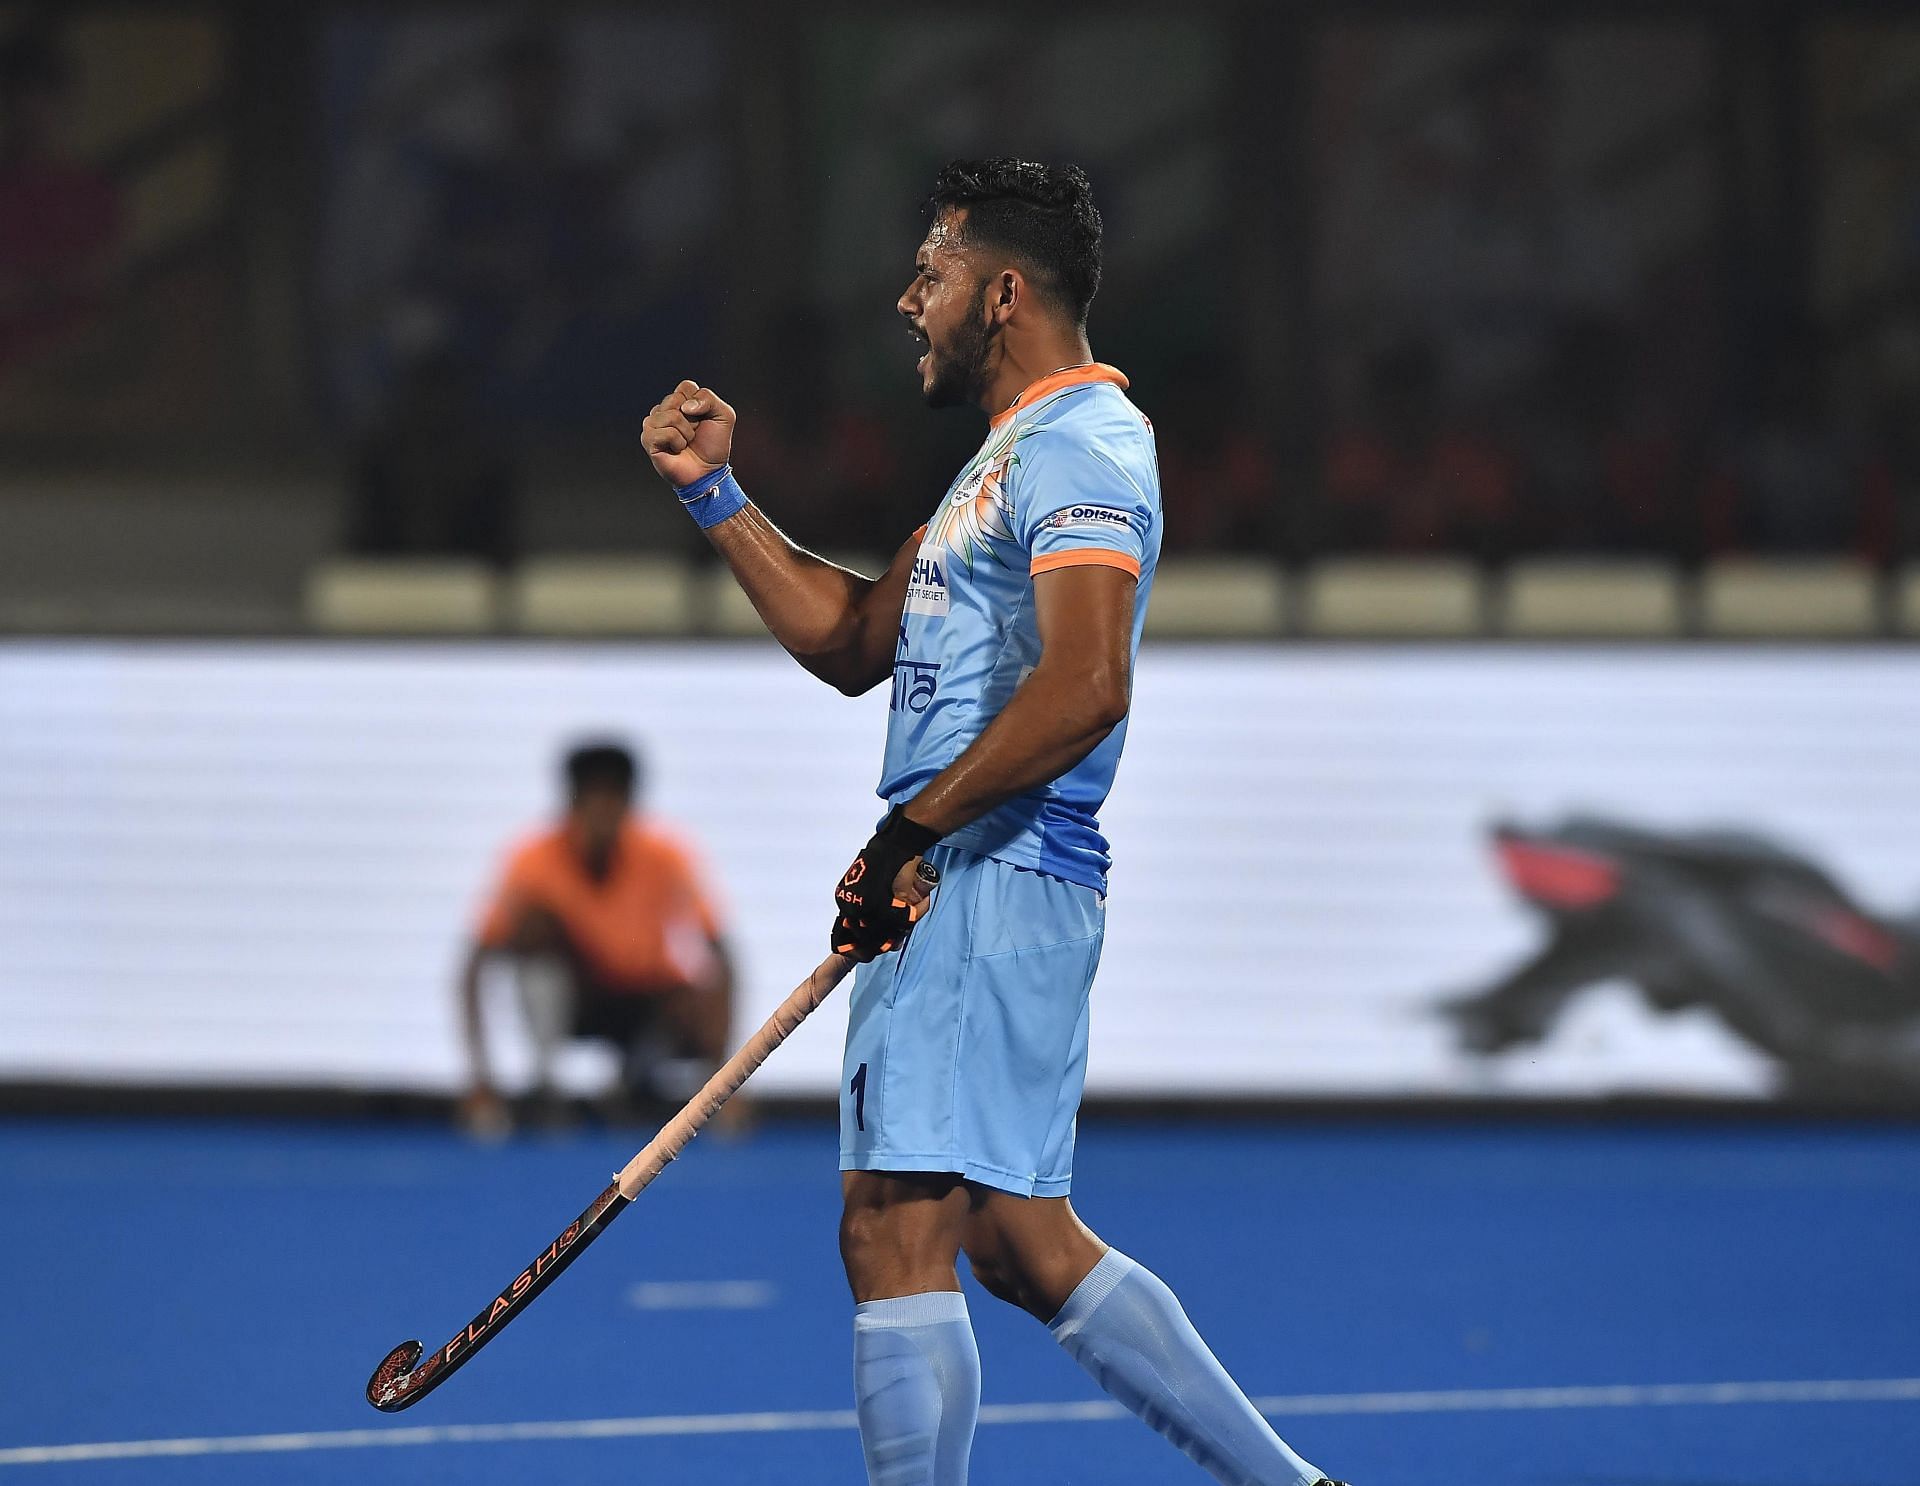 Harmanpreet Singh is currently the leading goal-scorer in the FIH Pro League (Image courtesy: Hockey India)